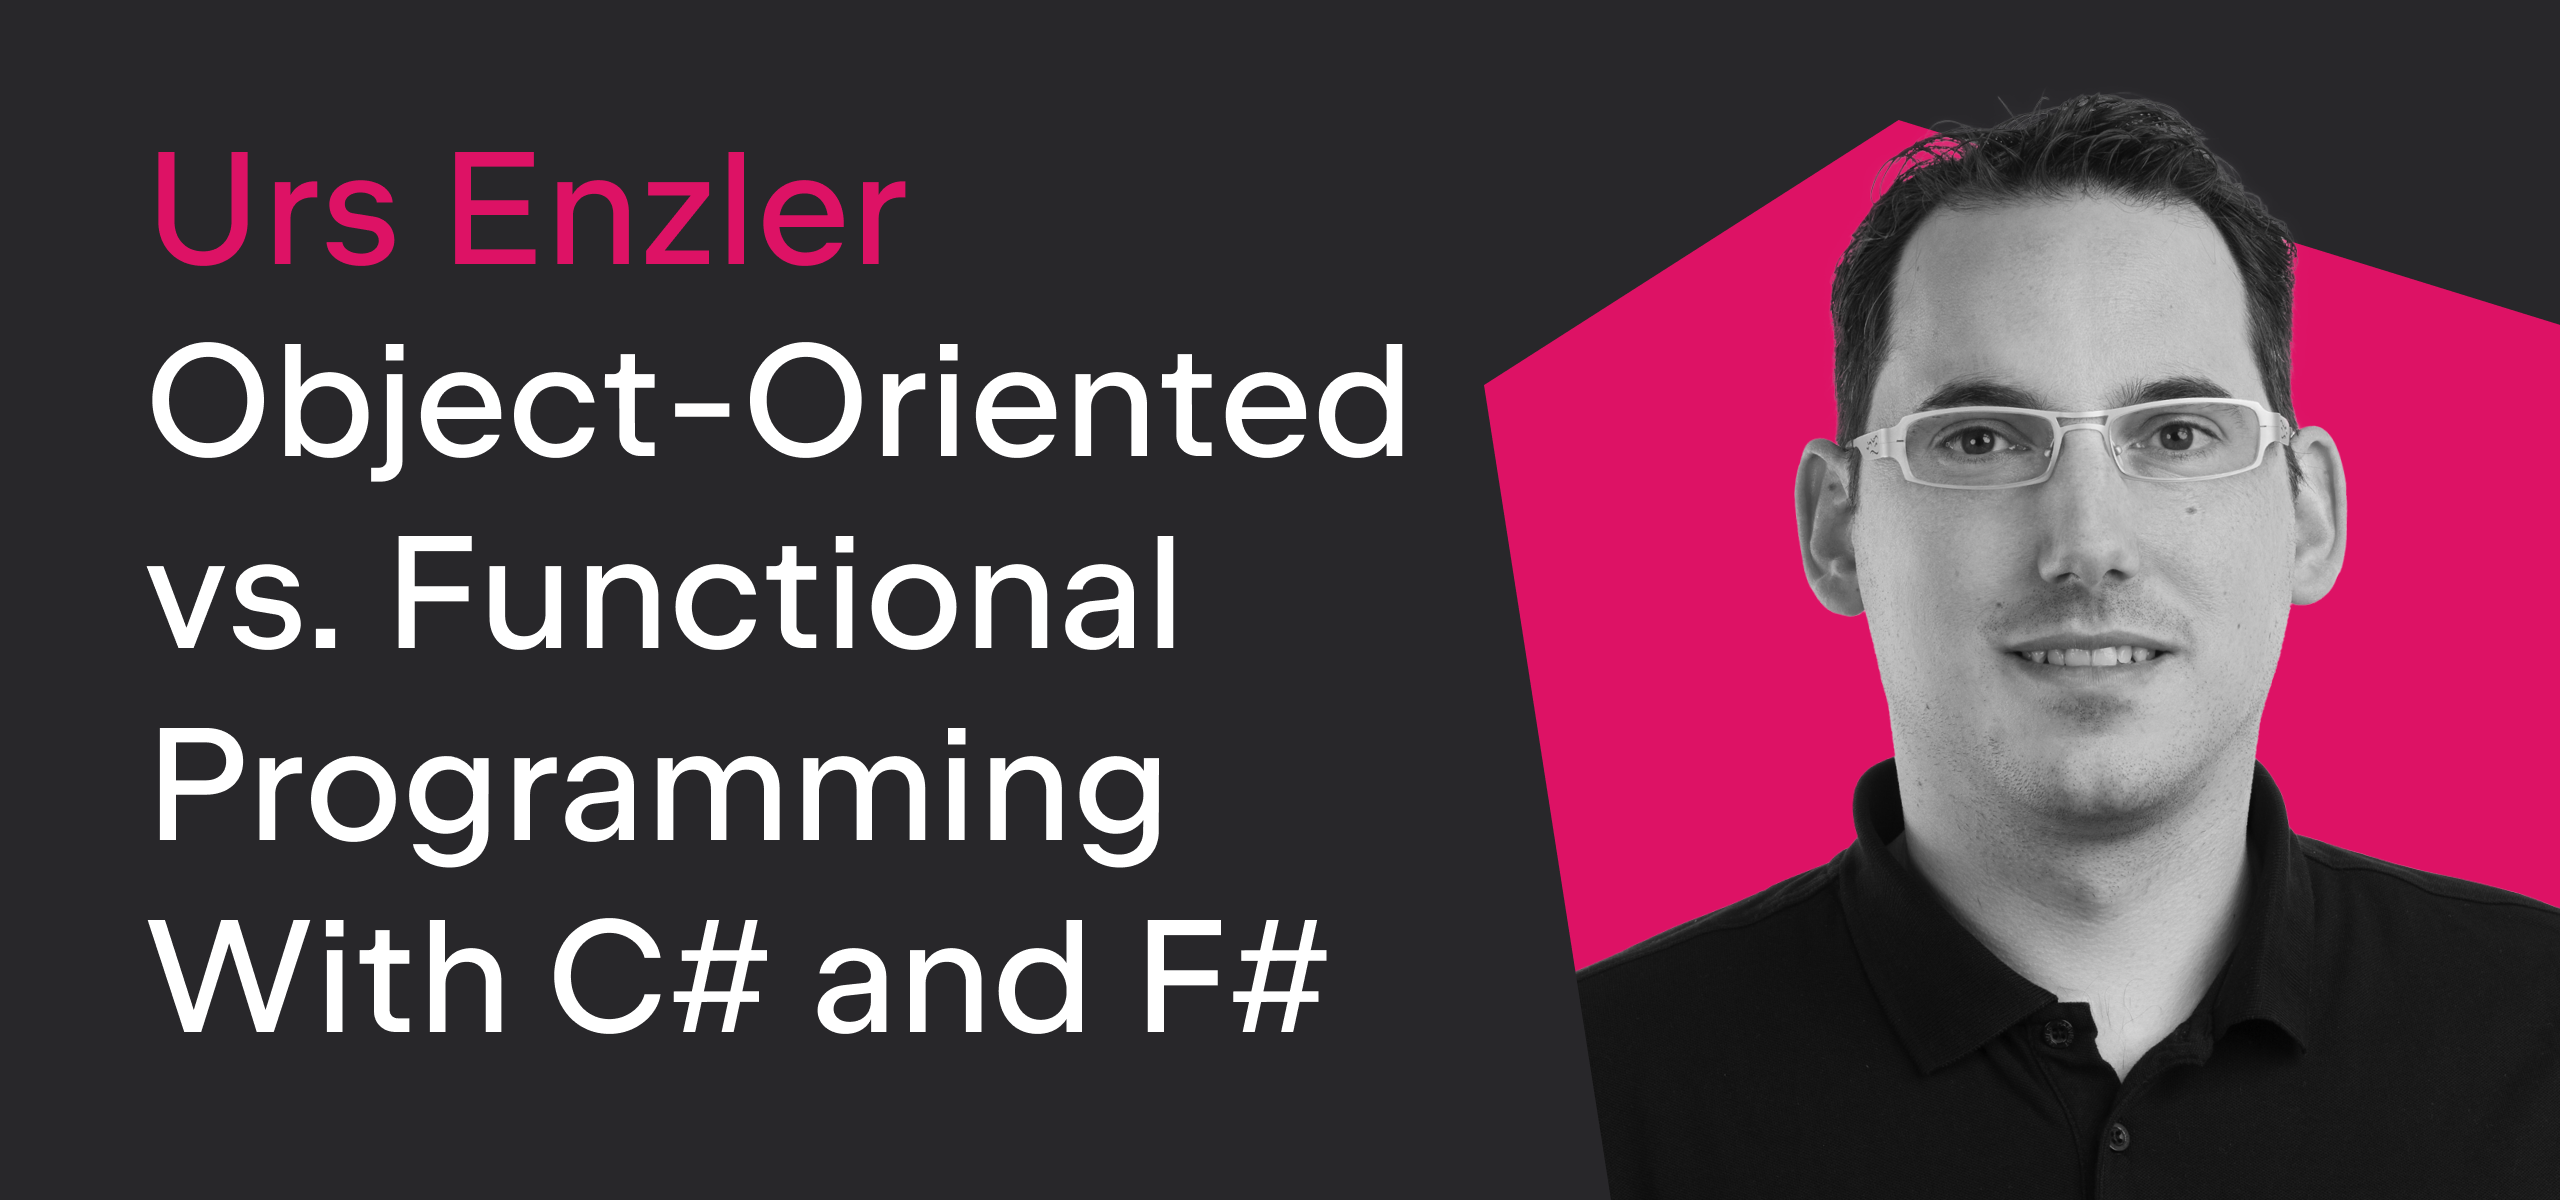 Urs Enzler Object-Oriented vs. Functional Programming with C# and F#